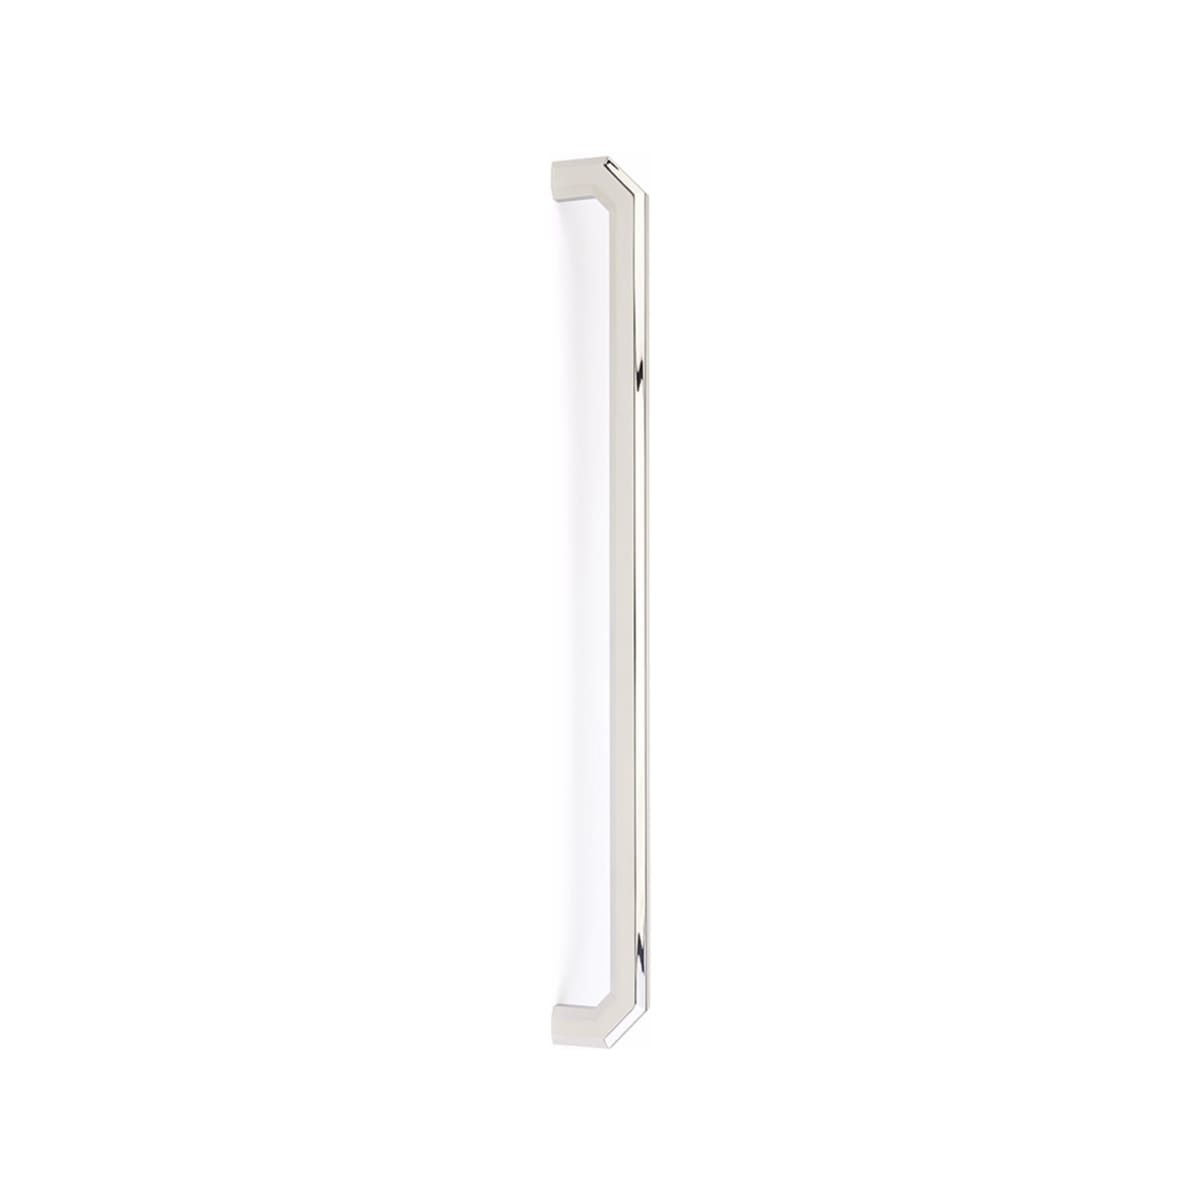 BTB86622US14 - Back to Back - Riviera Appliance Pull 18" - Polished Nickel